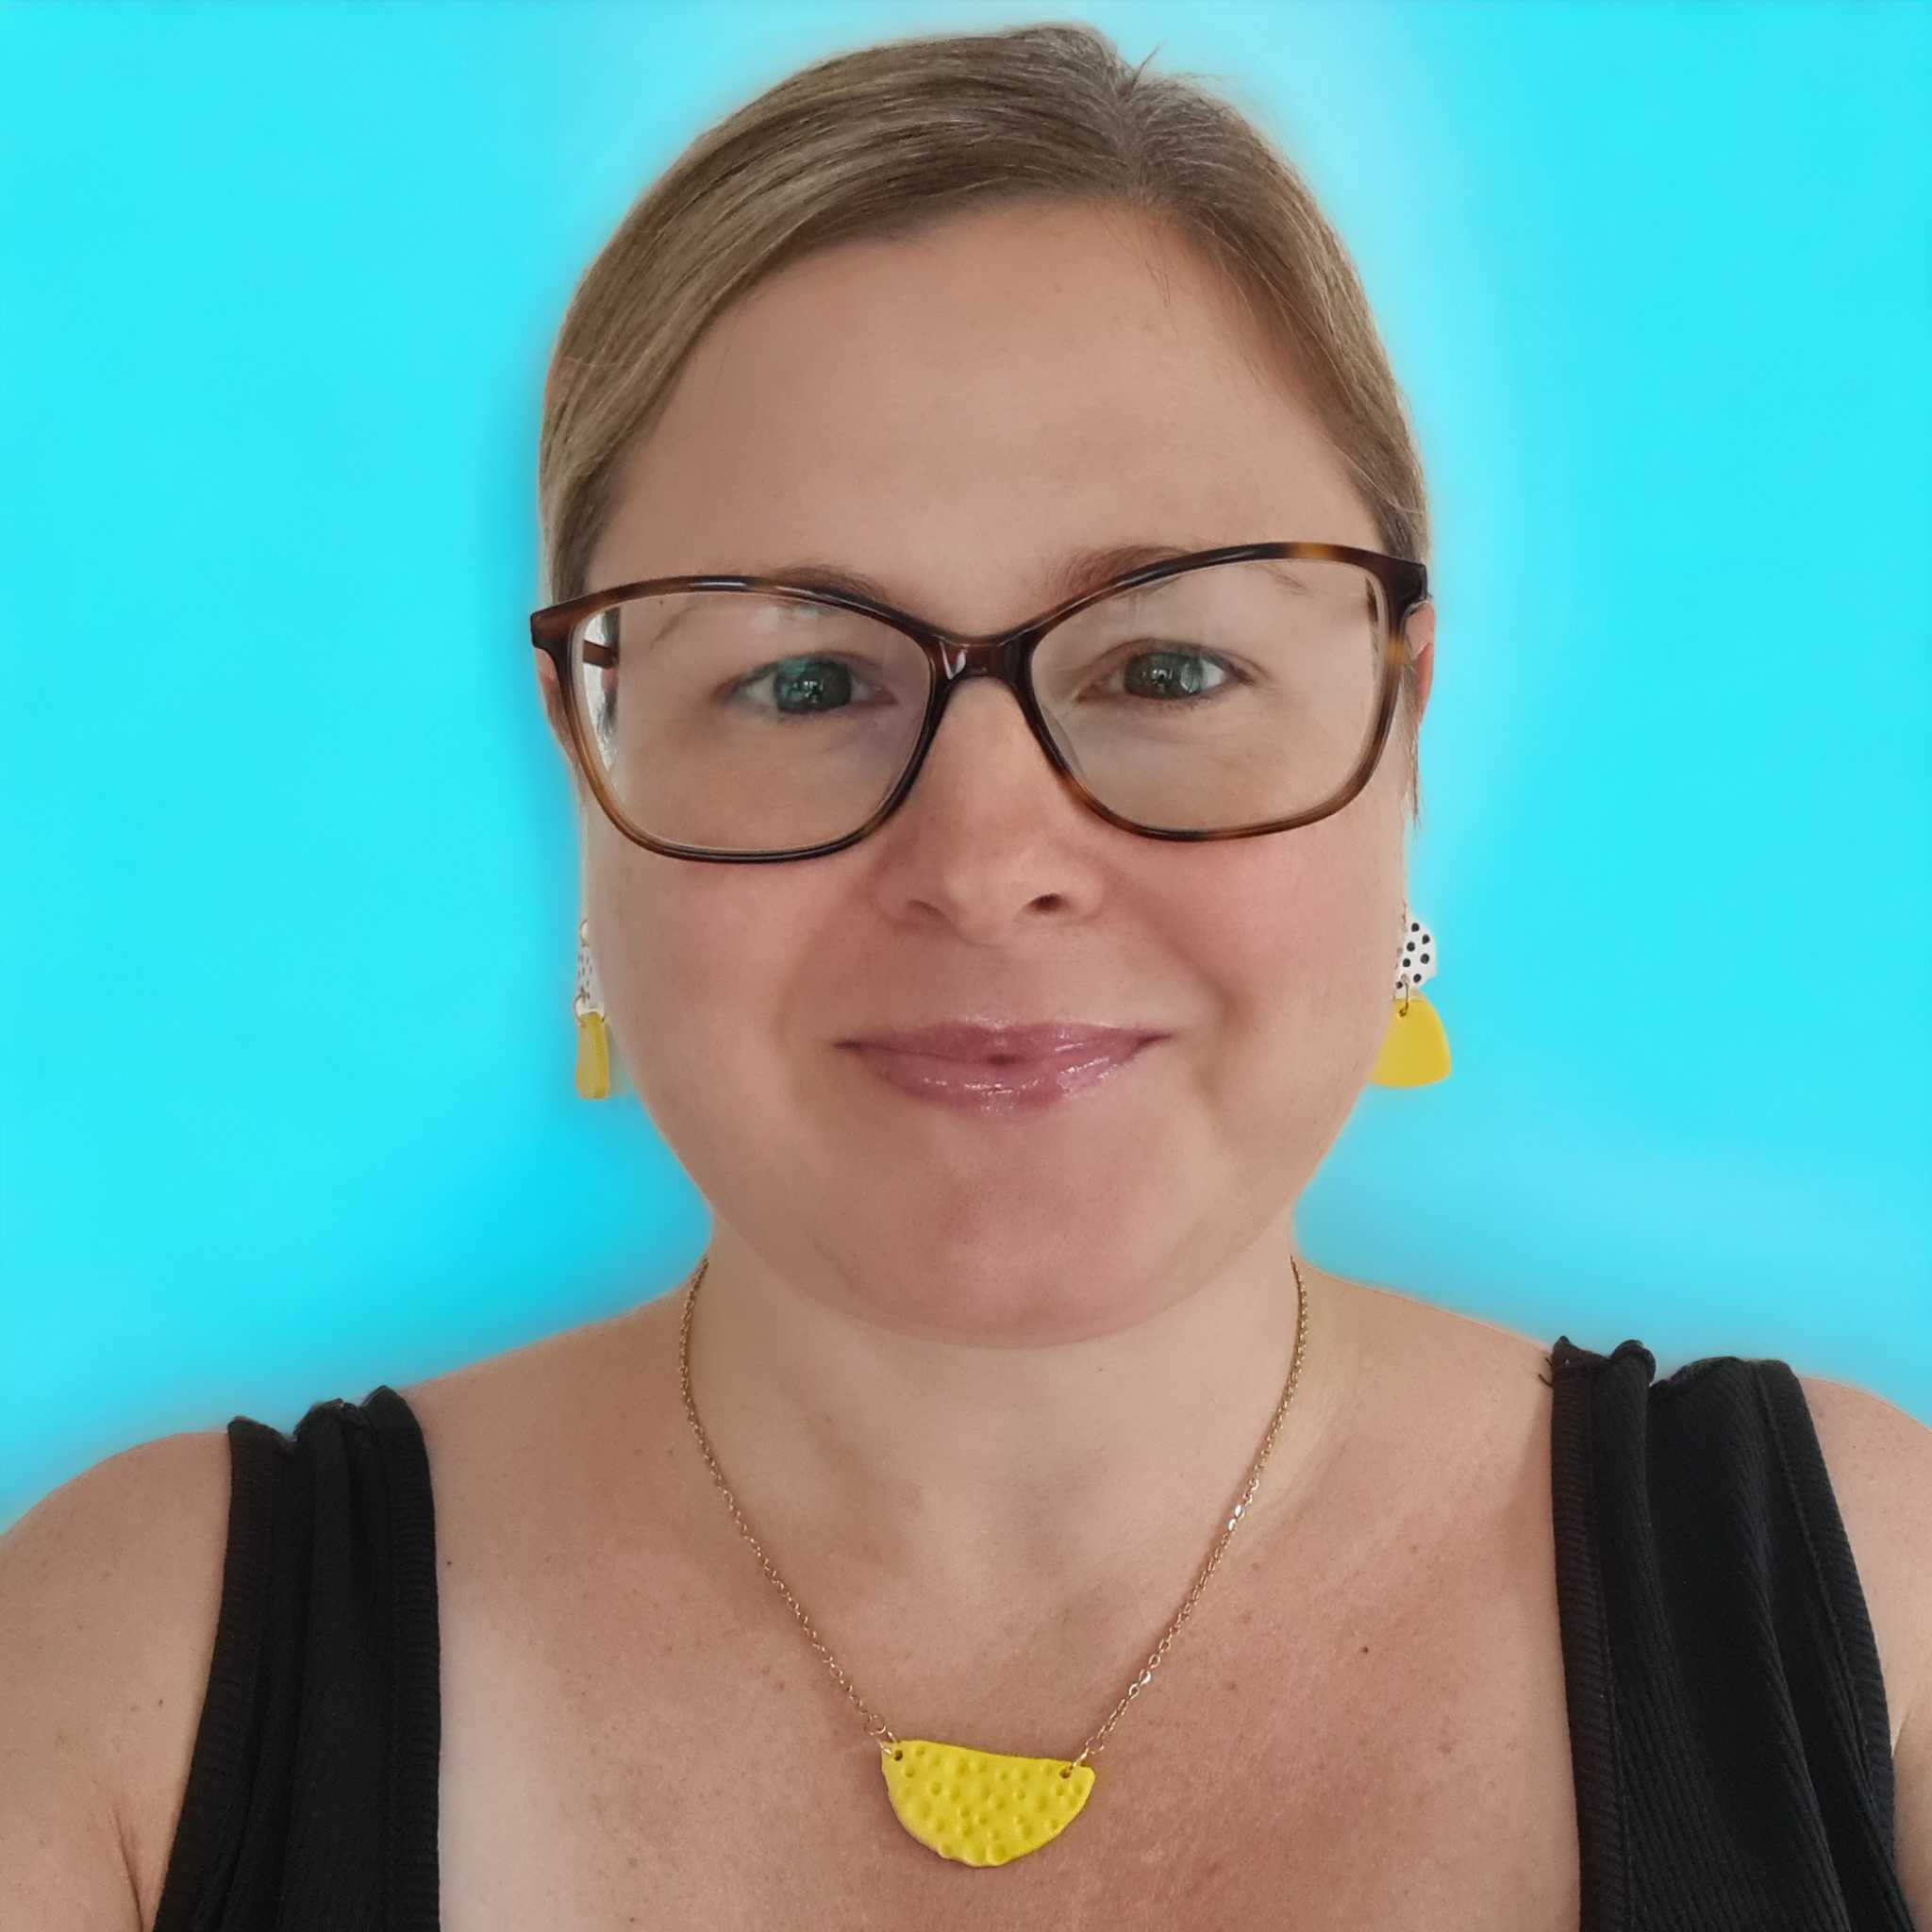 A photo of Amy Ayton wearing a pair of yellow earrings and a black top.